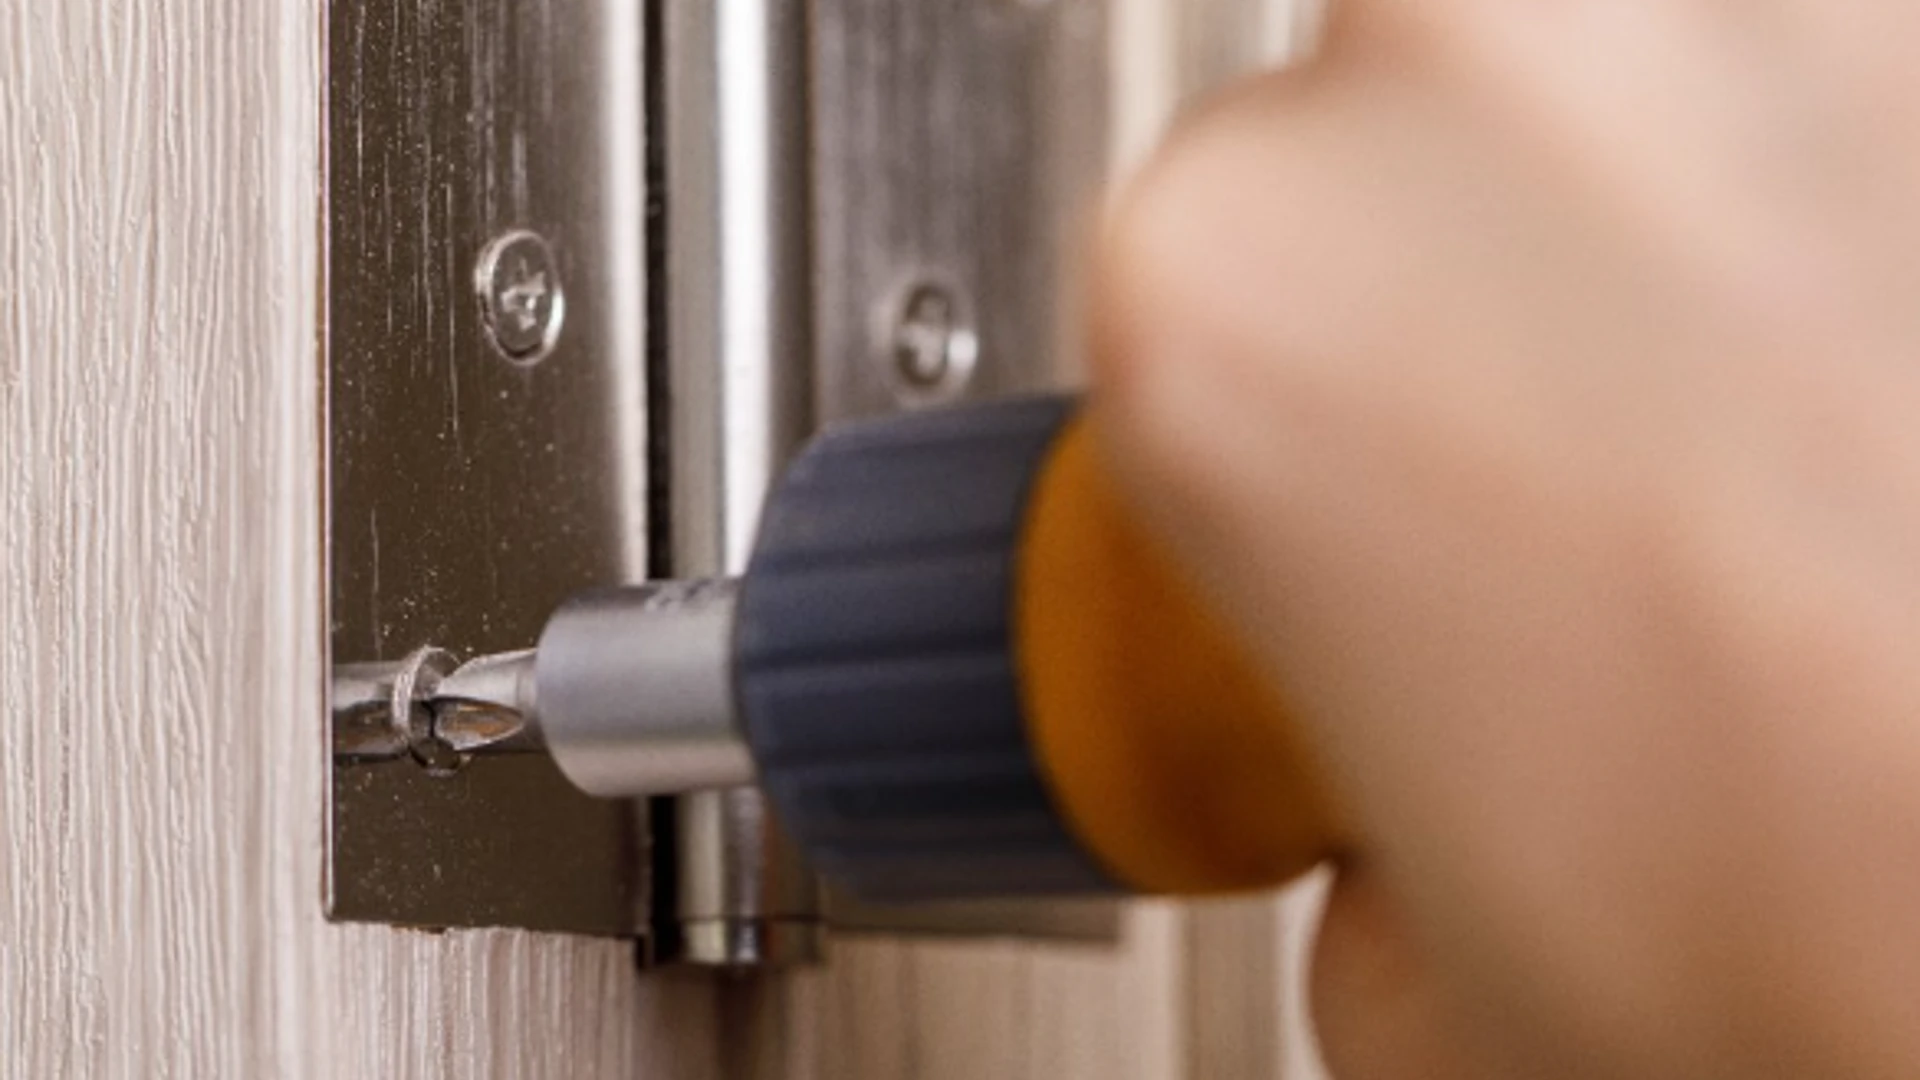 A handyman using a screwdriver to attach new hinges to an interior door frame during an appointment for interior door repair in Frisco, TX.